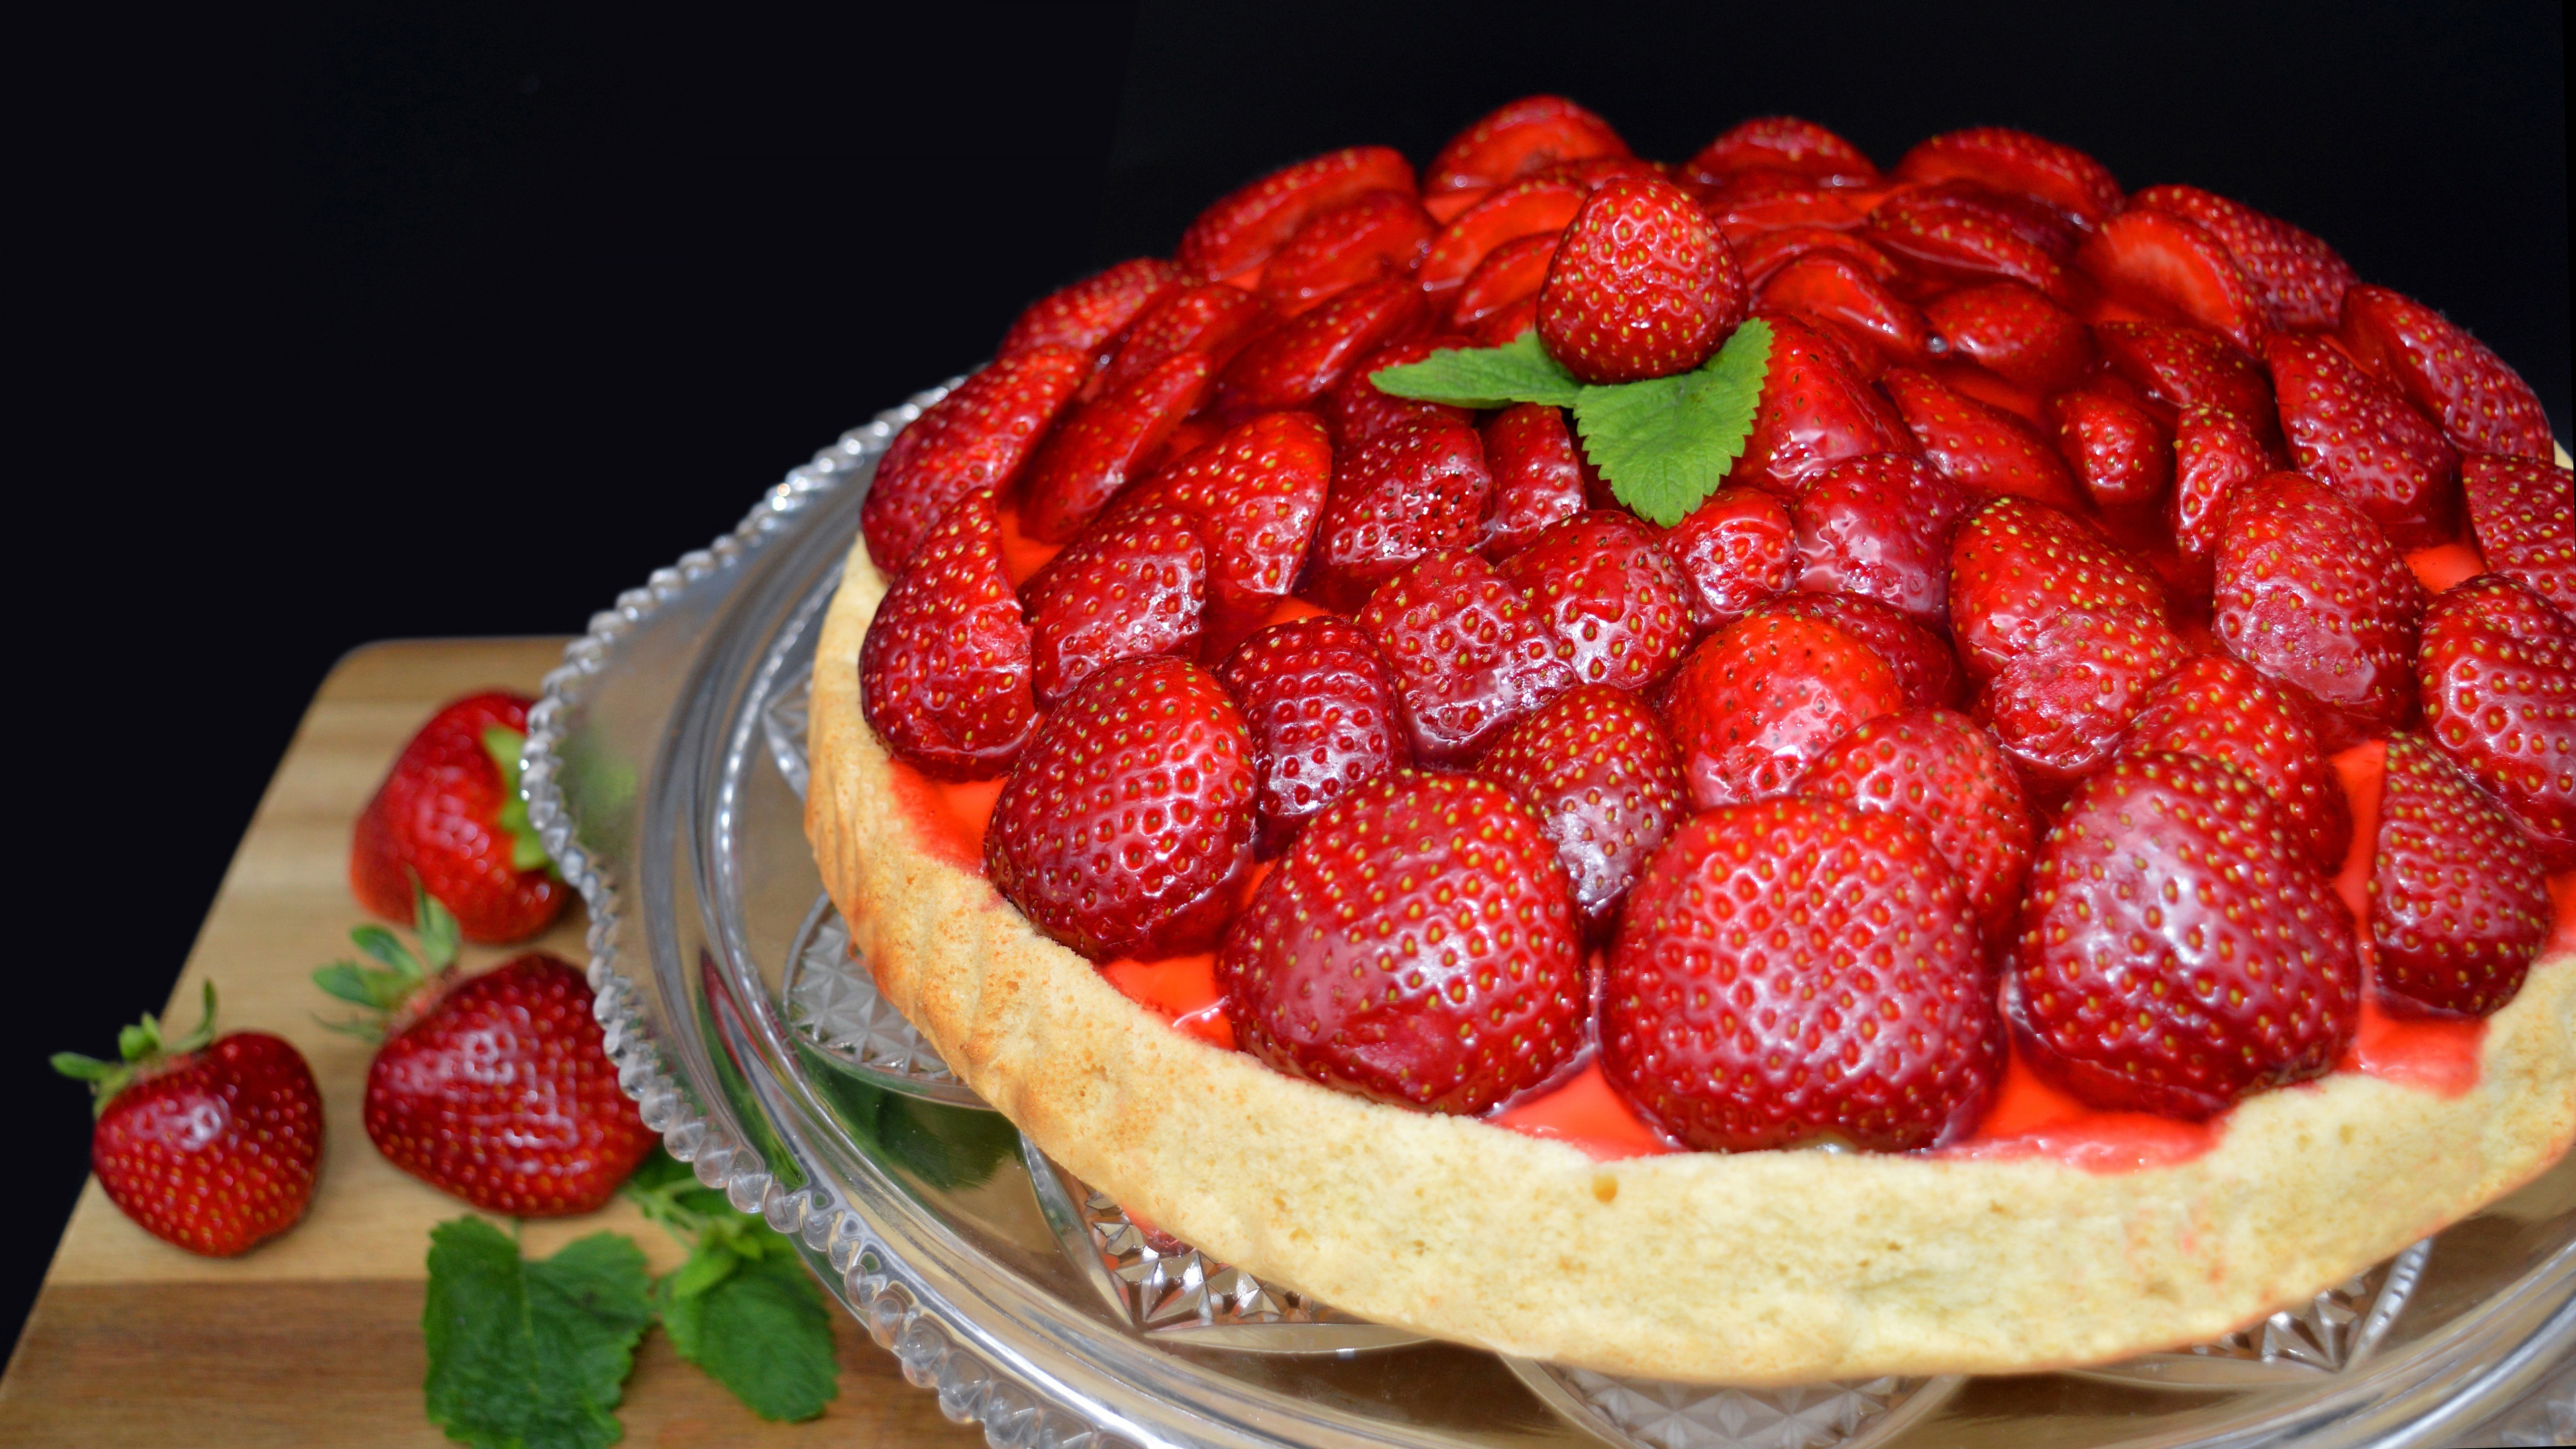 Pie: Filled with fruit, nuts, fruit preserves, brown sugar, sweetened vegetables. 3840x2160 4K Background.